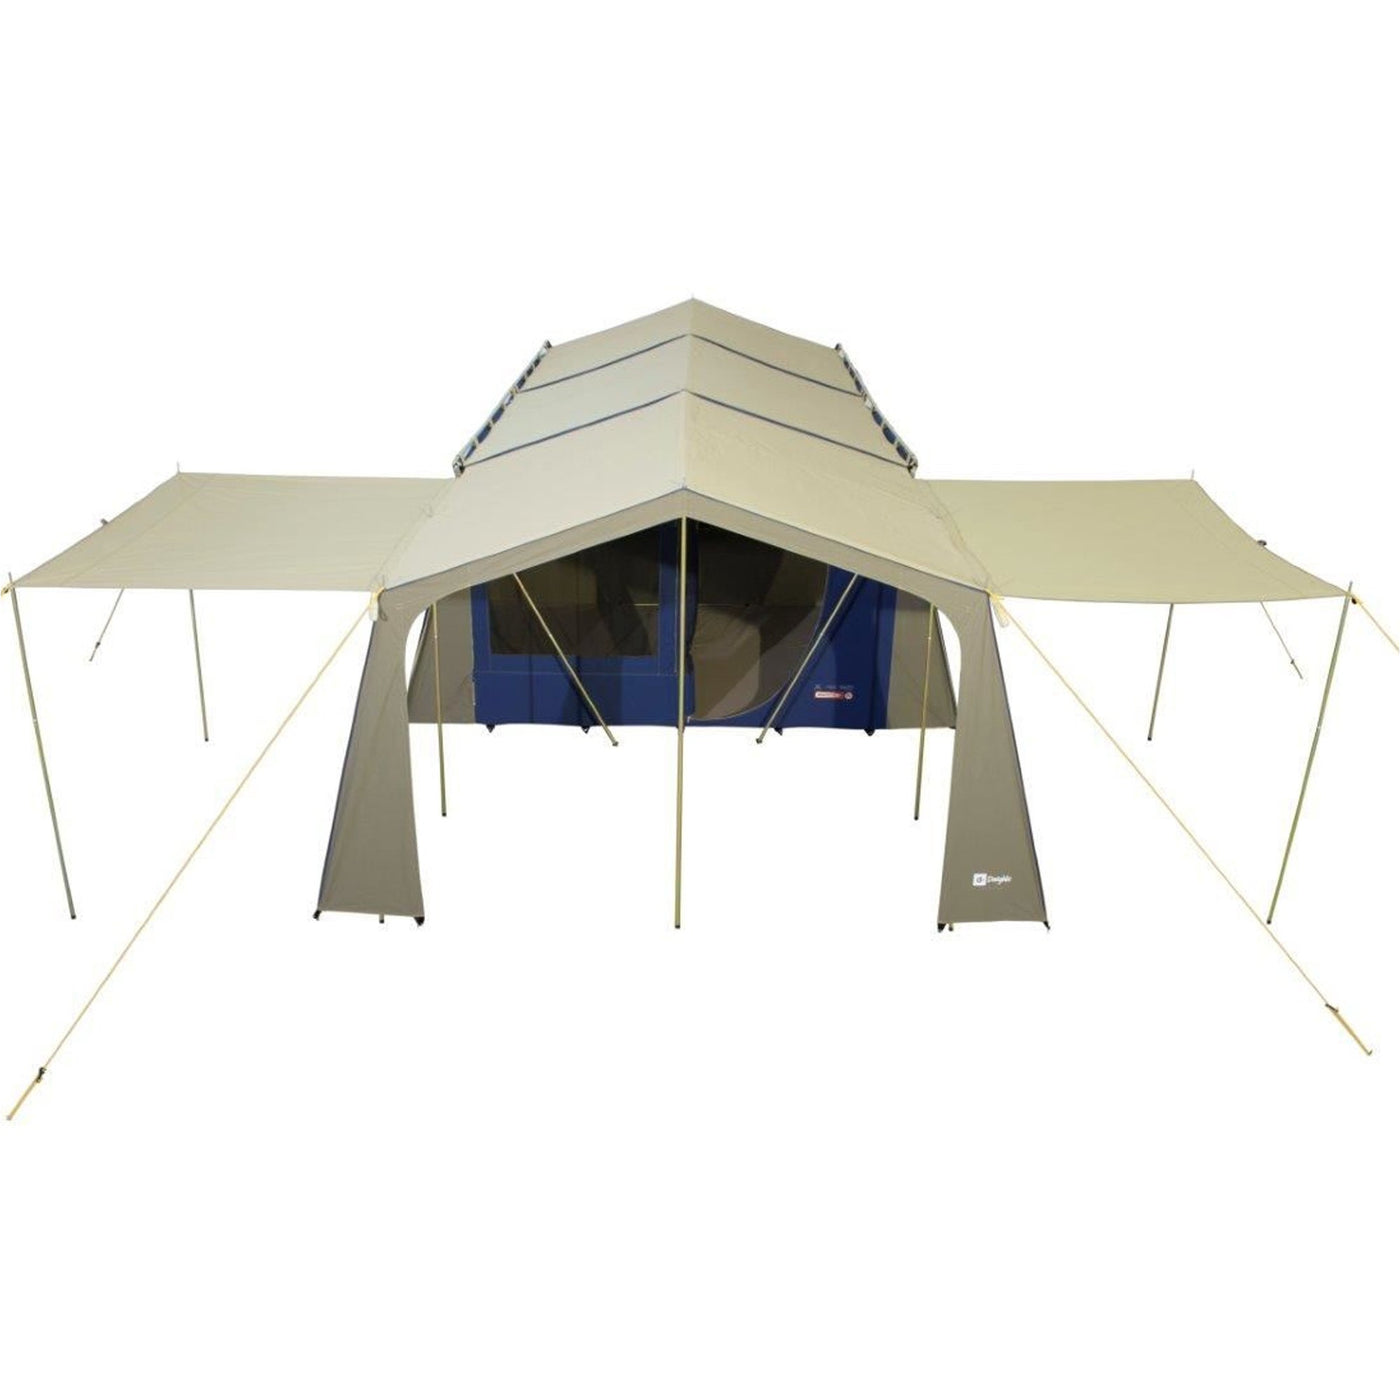 Coastline tent with 2x Optional Veranda awnings attached.